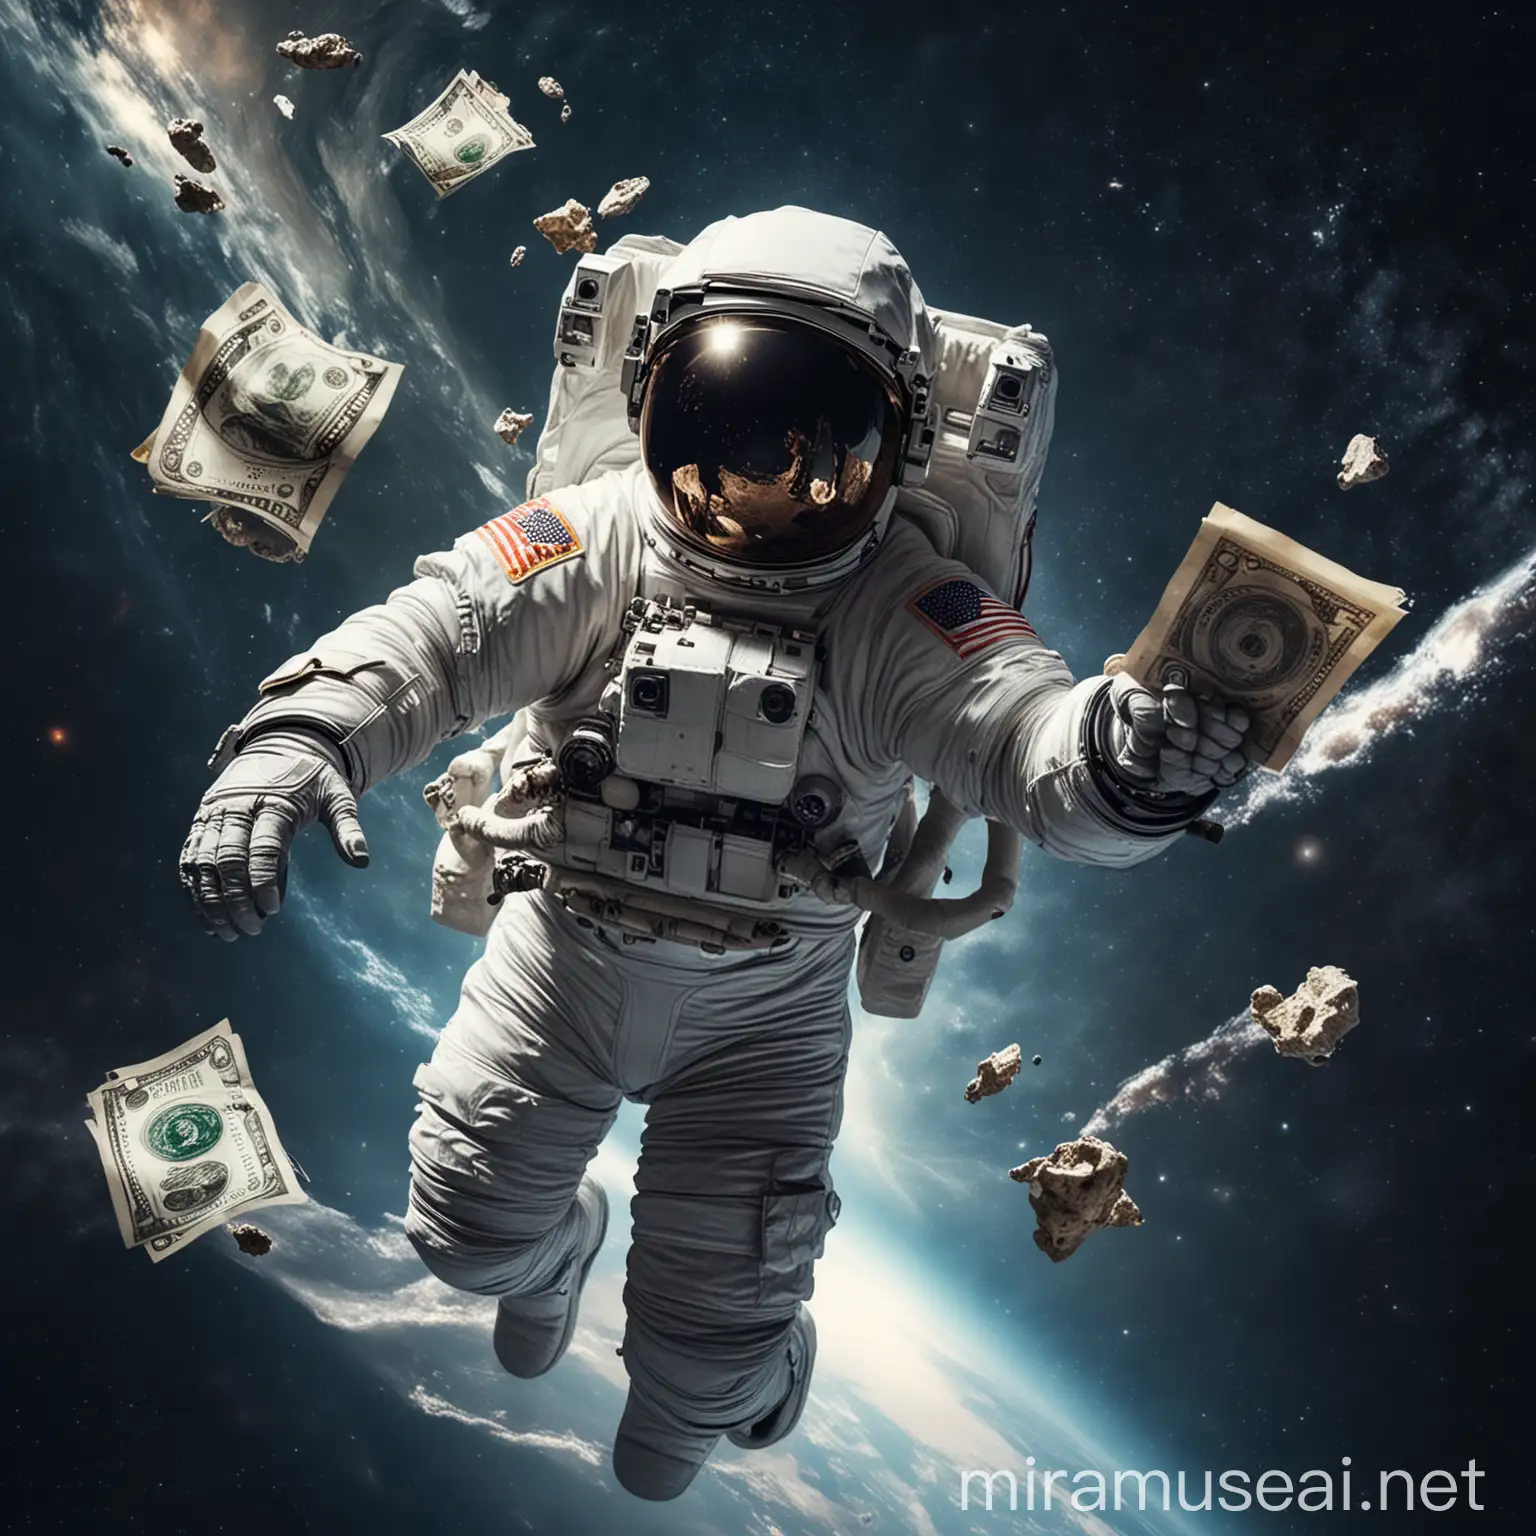 An astronaut is flying in space, he has a lot of money in his hand